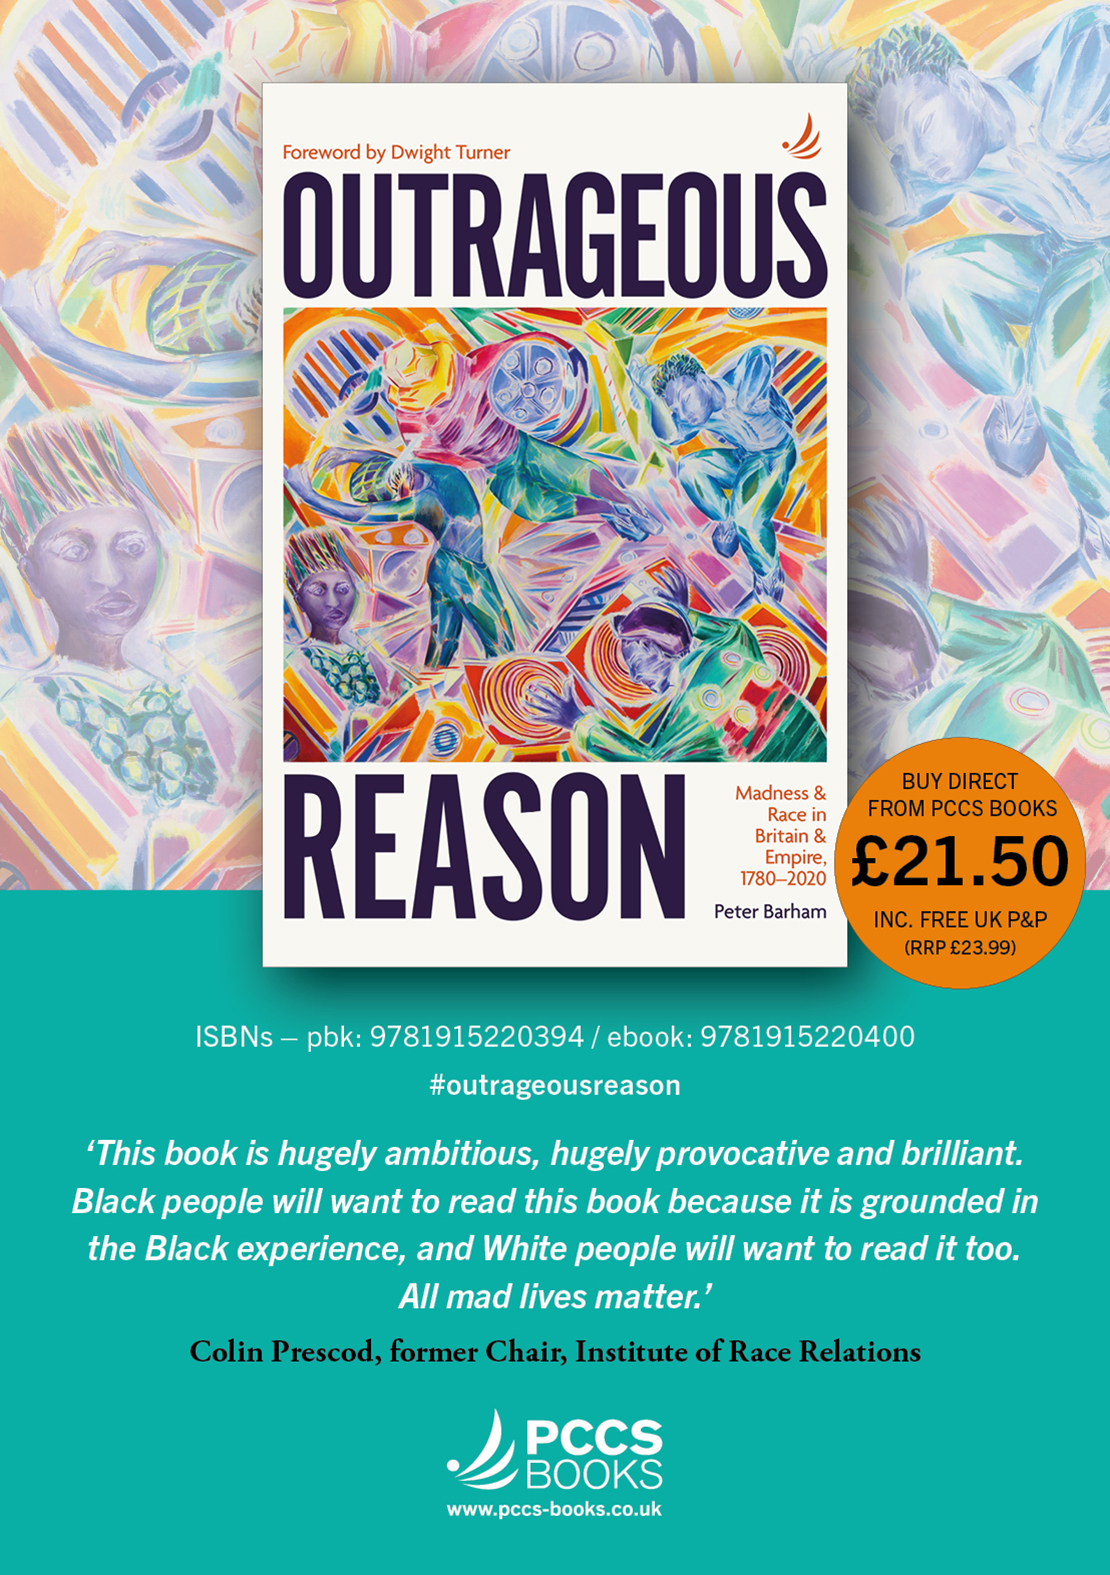 Book Launch - Outrageous Reason by Peter Barham